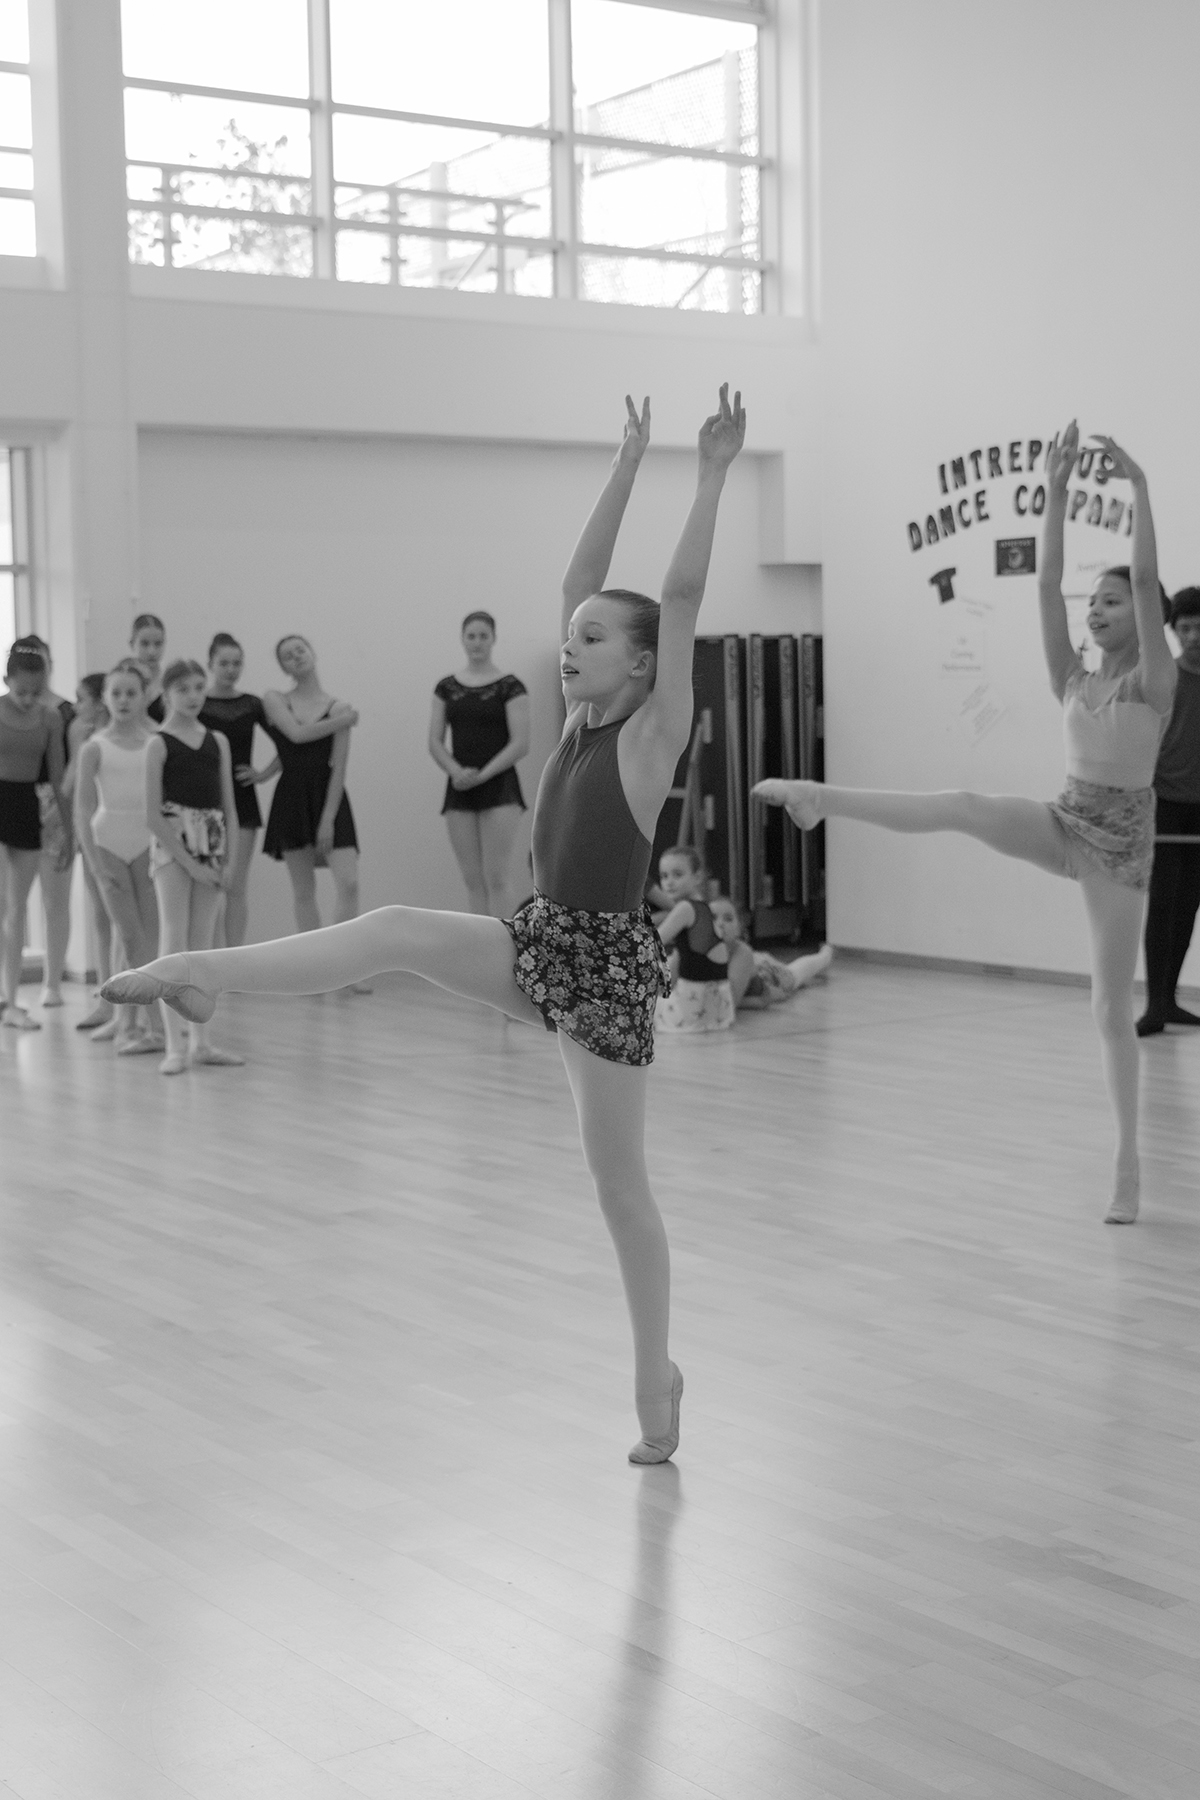 A young female ballet dancer in rehearsal